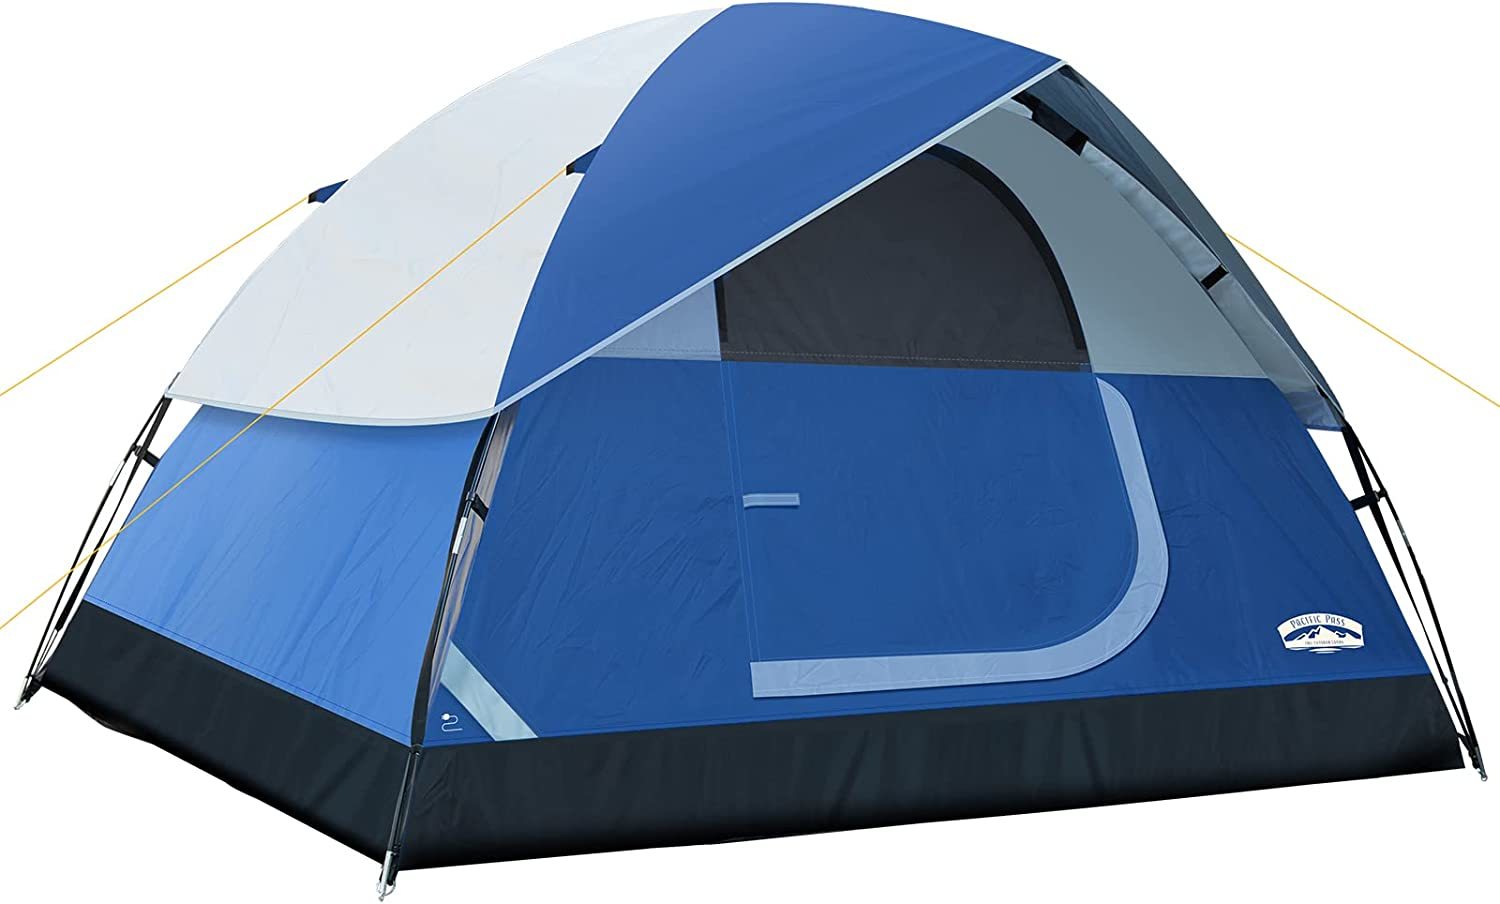 Primary image for Pacific Pass Camping Tent 6 Person Family Dome Tent with Removable Rain Fly,